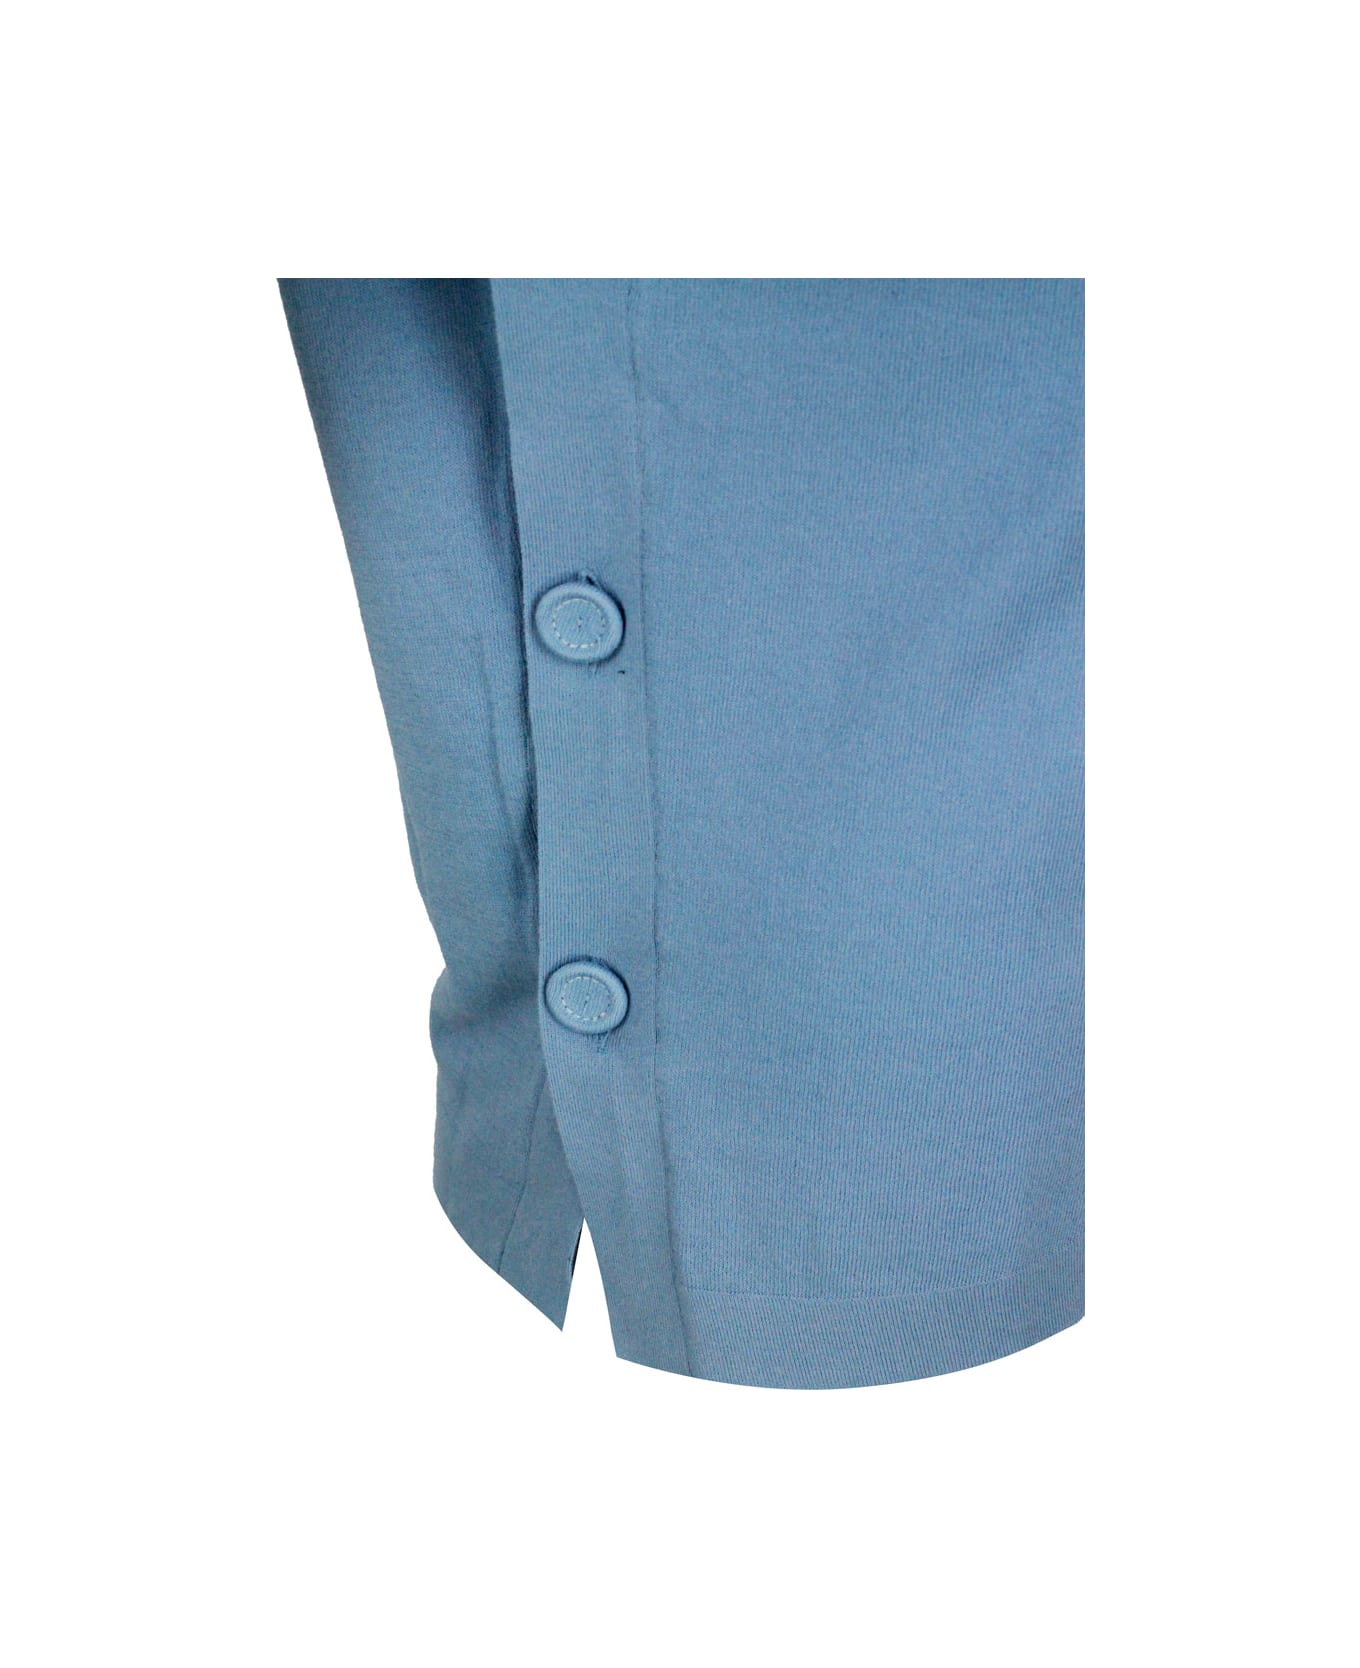 Malo Cotton Sweater With Sleeveless V-neck And Buttons On The Sides - Light Blu Tシャツ